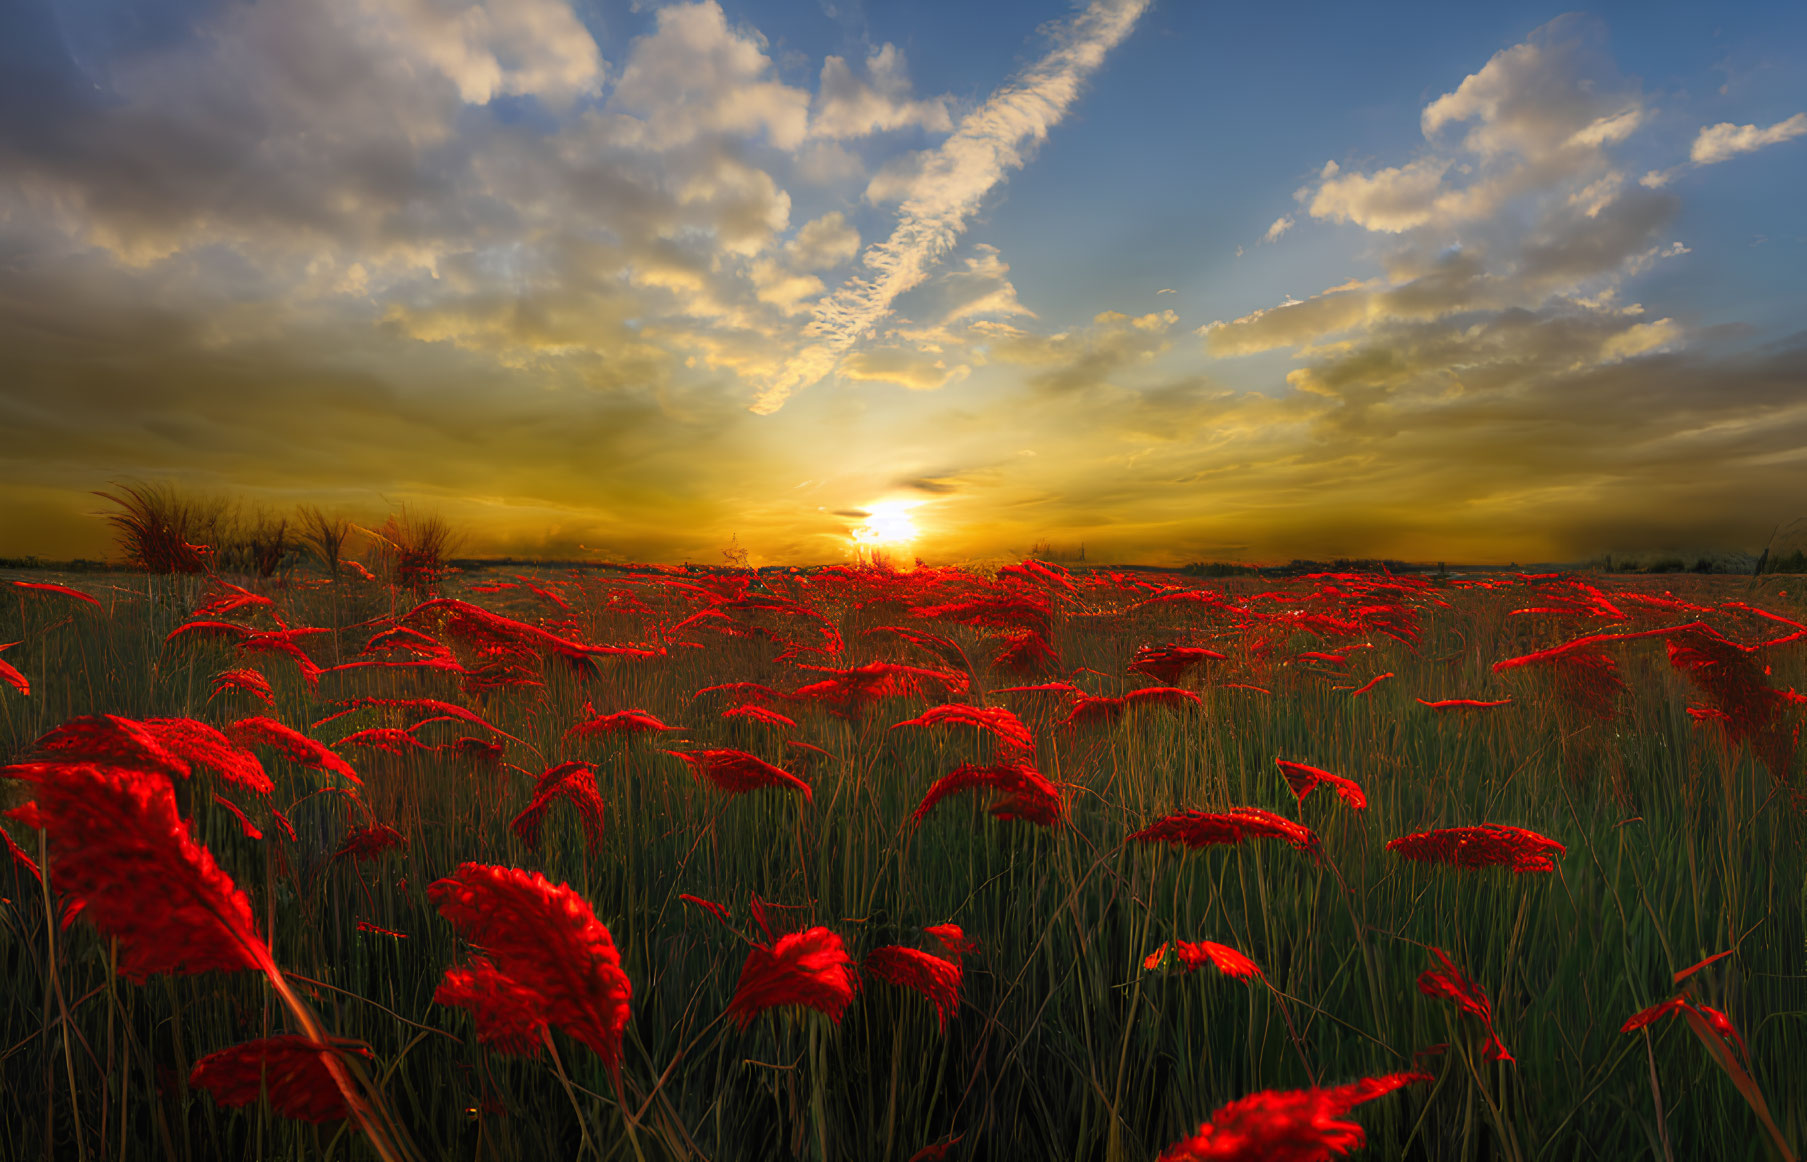 Colorful sunset over red flower field with dramatic clouds